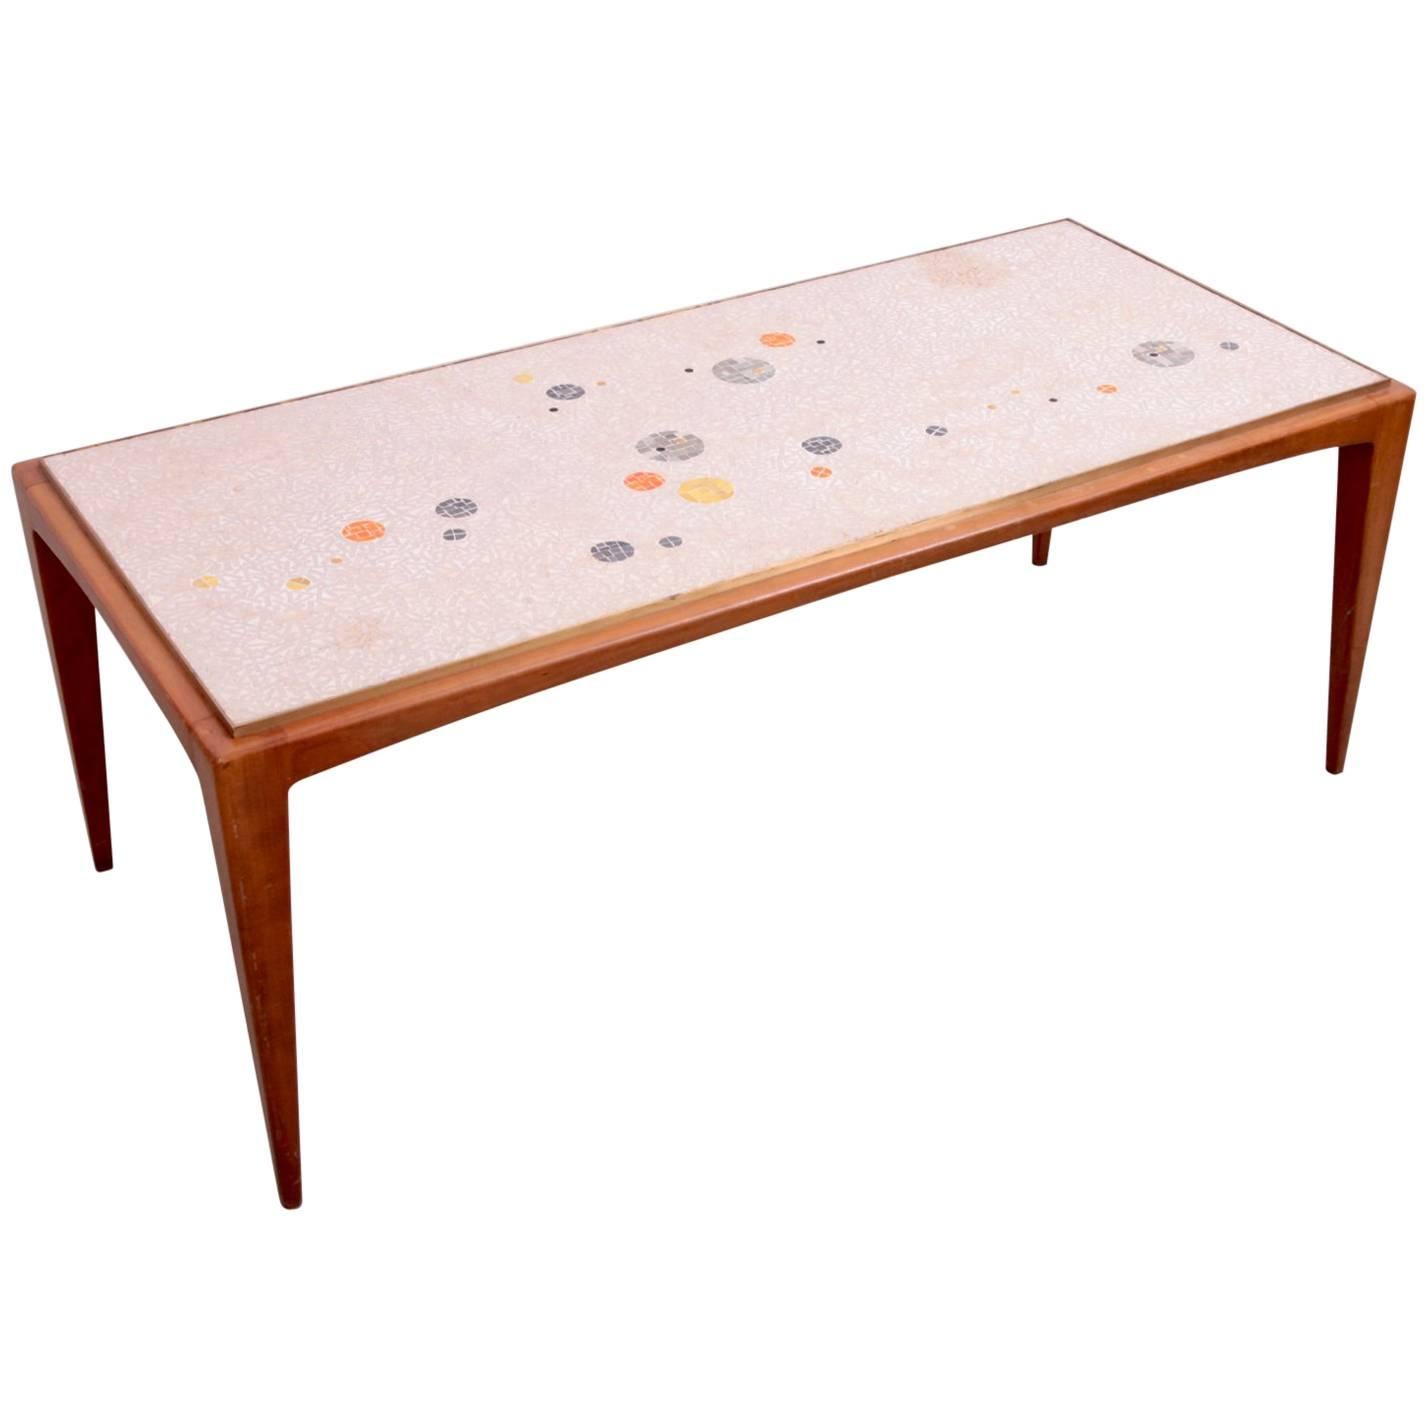 Signed Berthold Muller Mosaic Coffee Table on Wood Base, Germany, 1958 For Sale